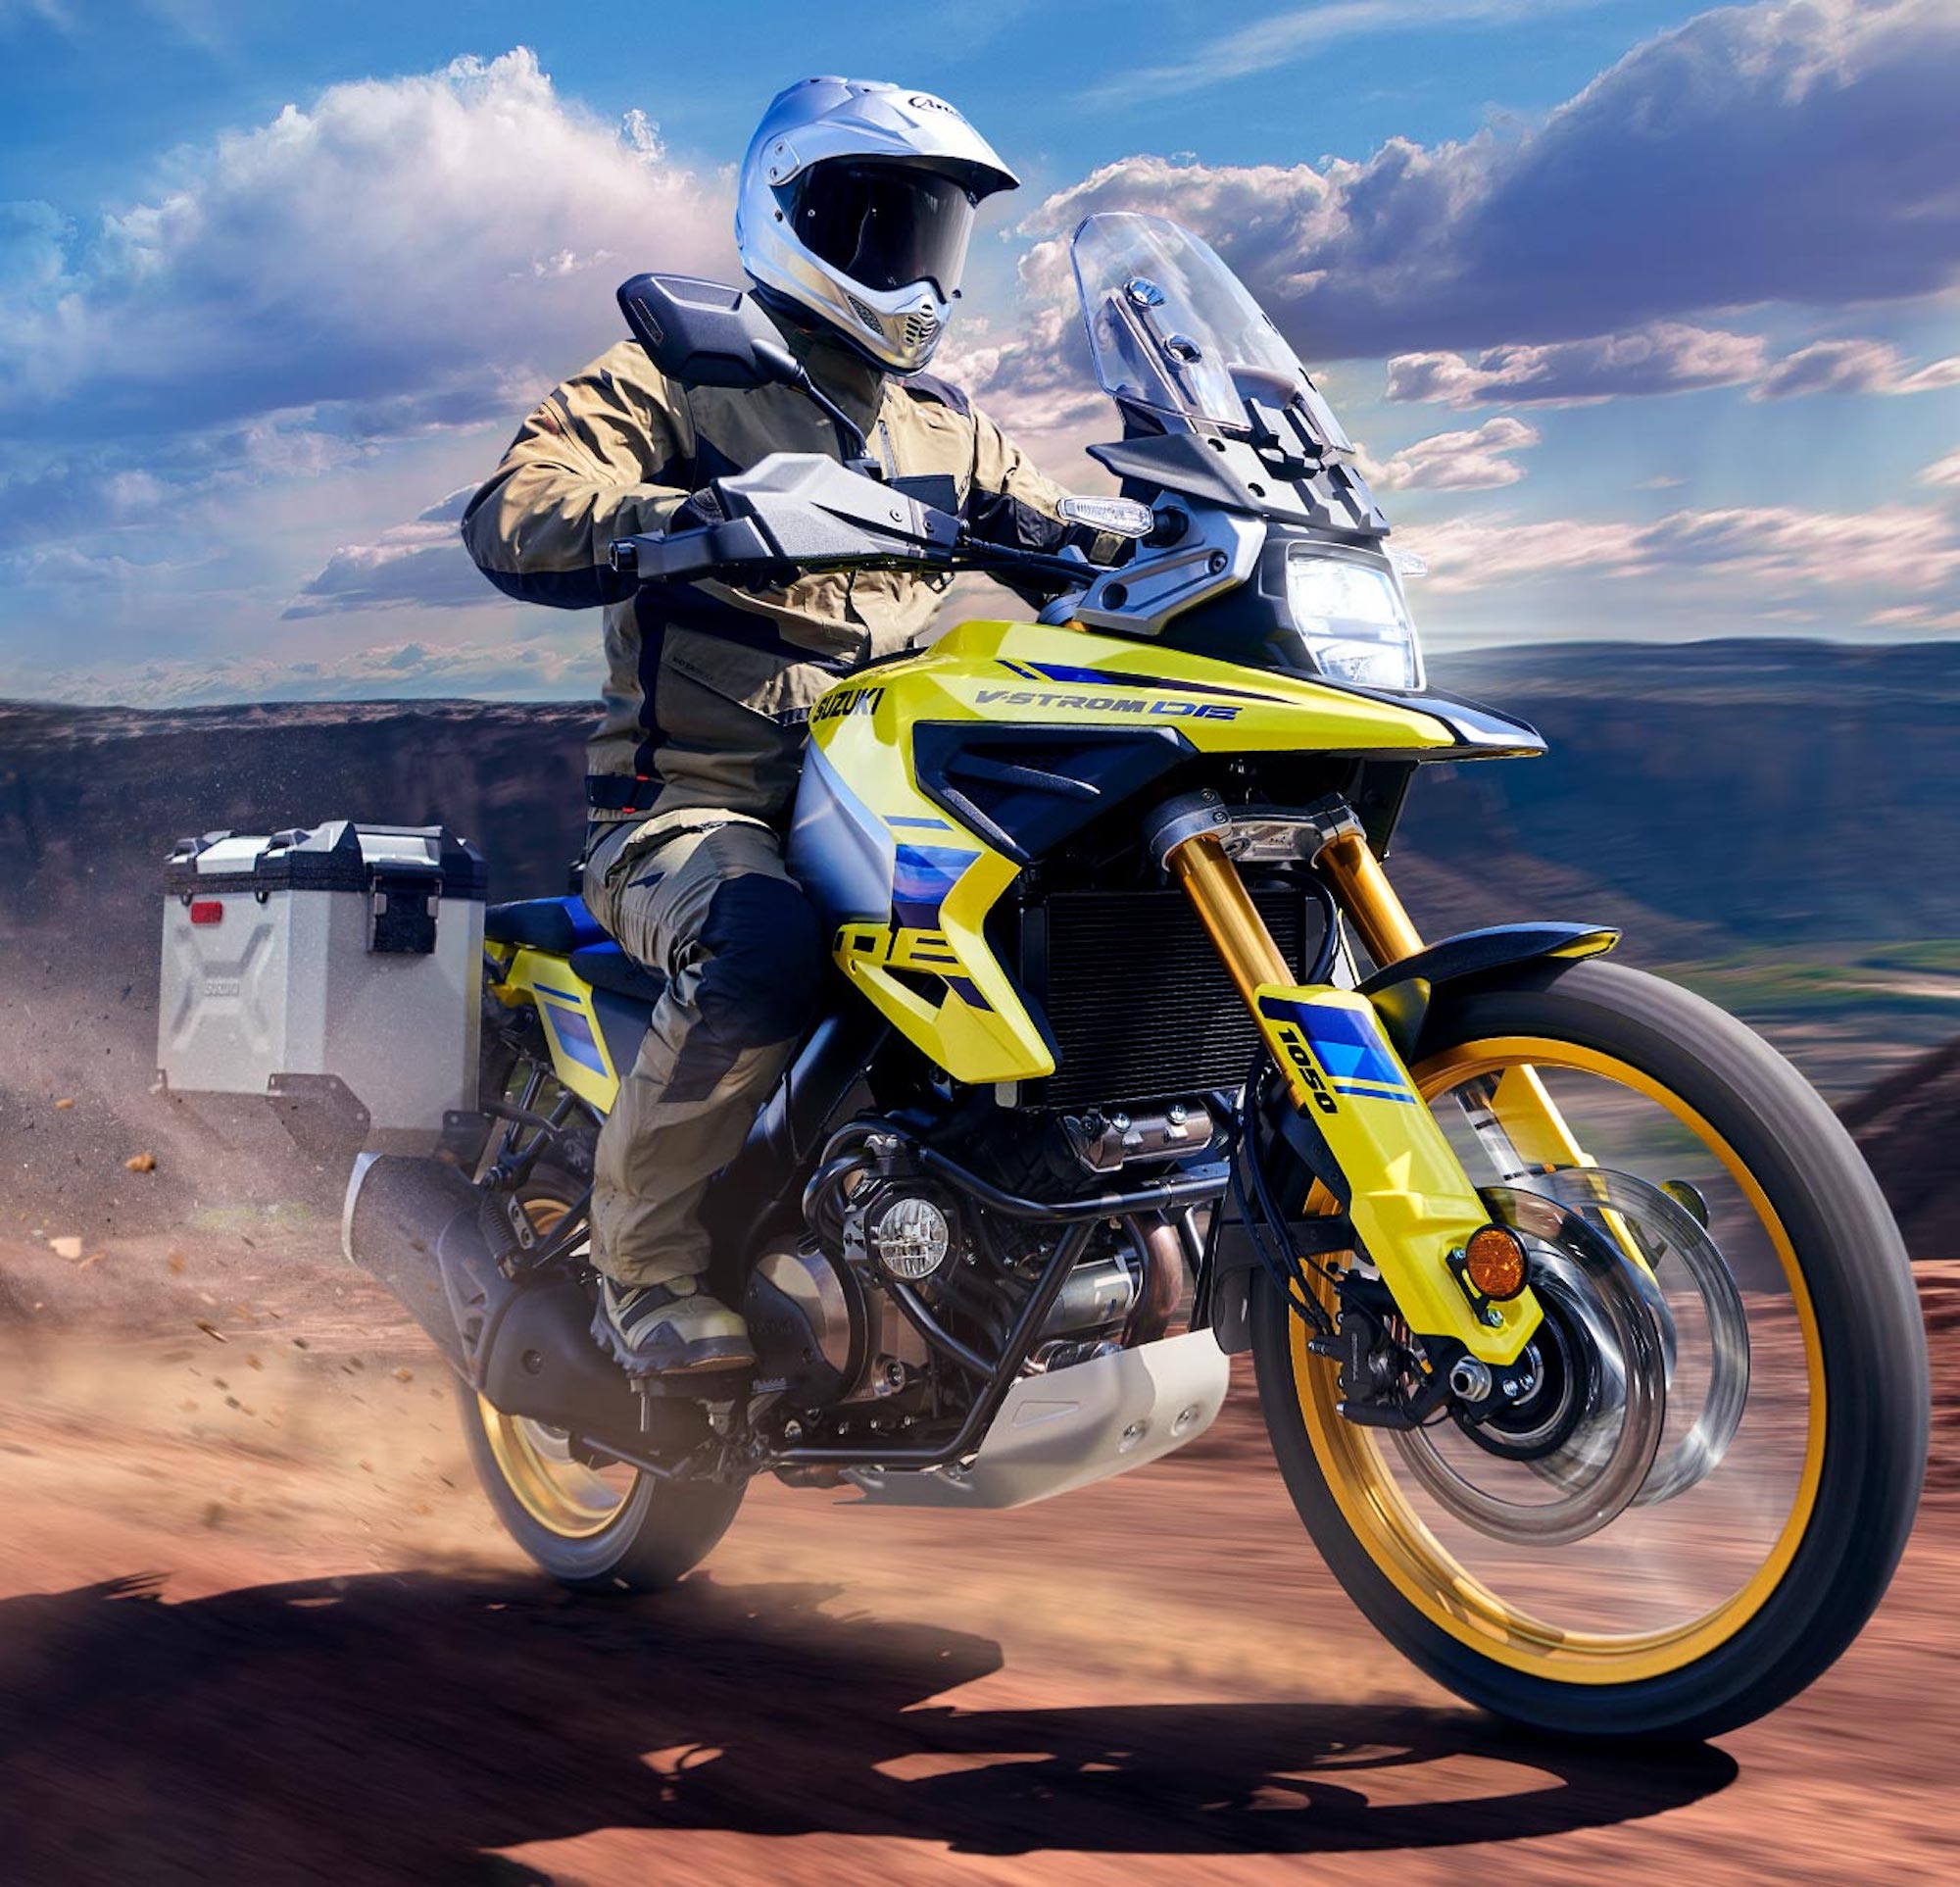 The All-New V-Strom 800DE Adventure. Media sourced from Suzuki Cycles.